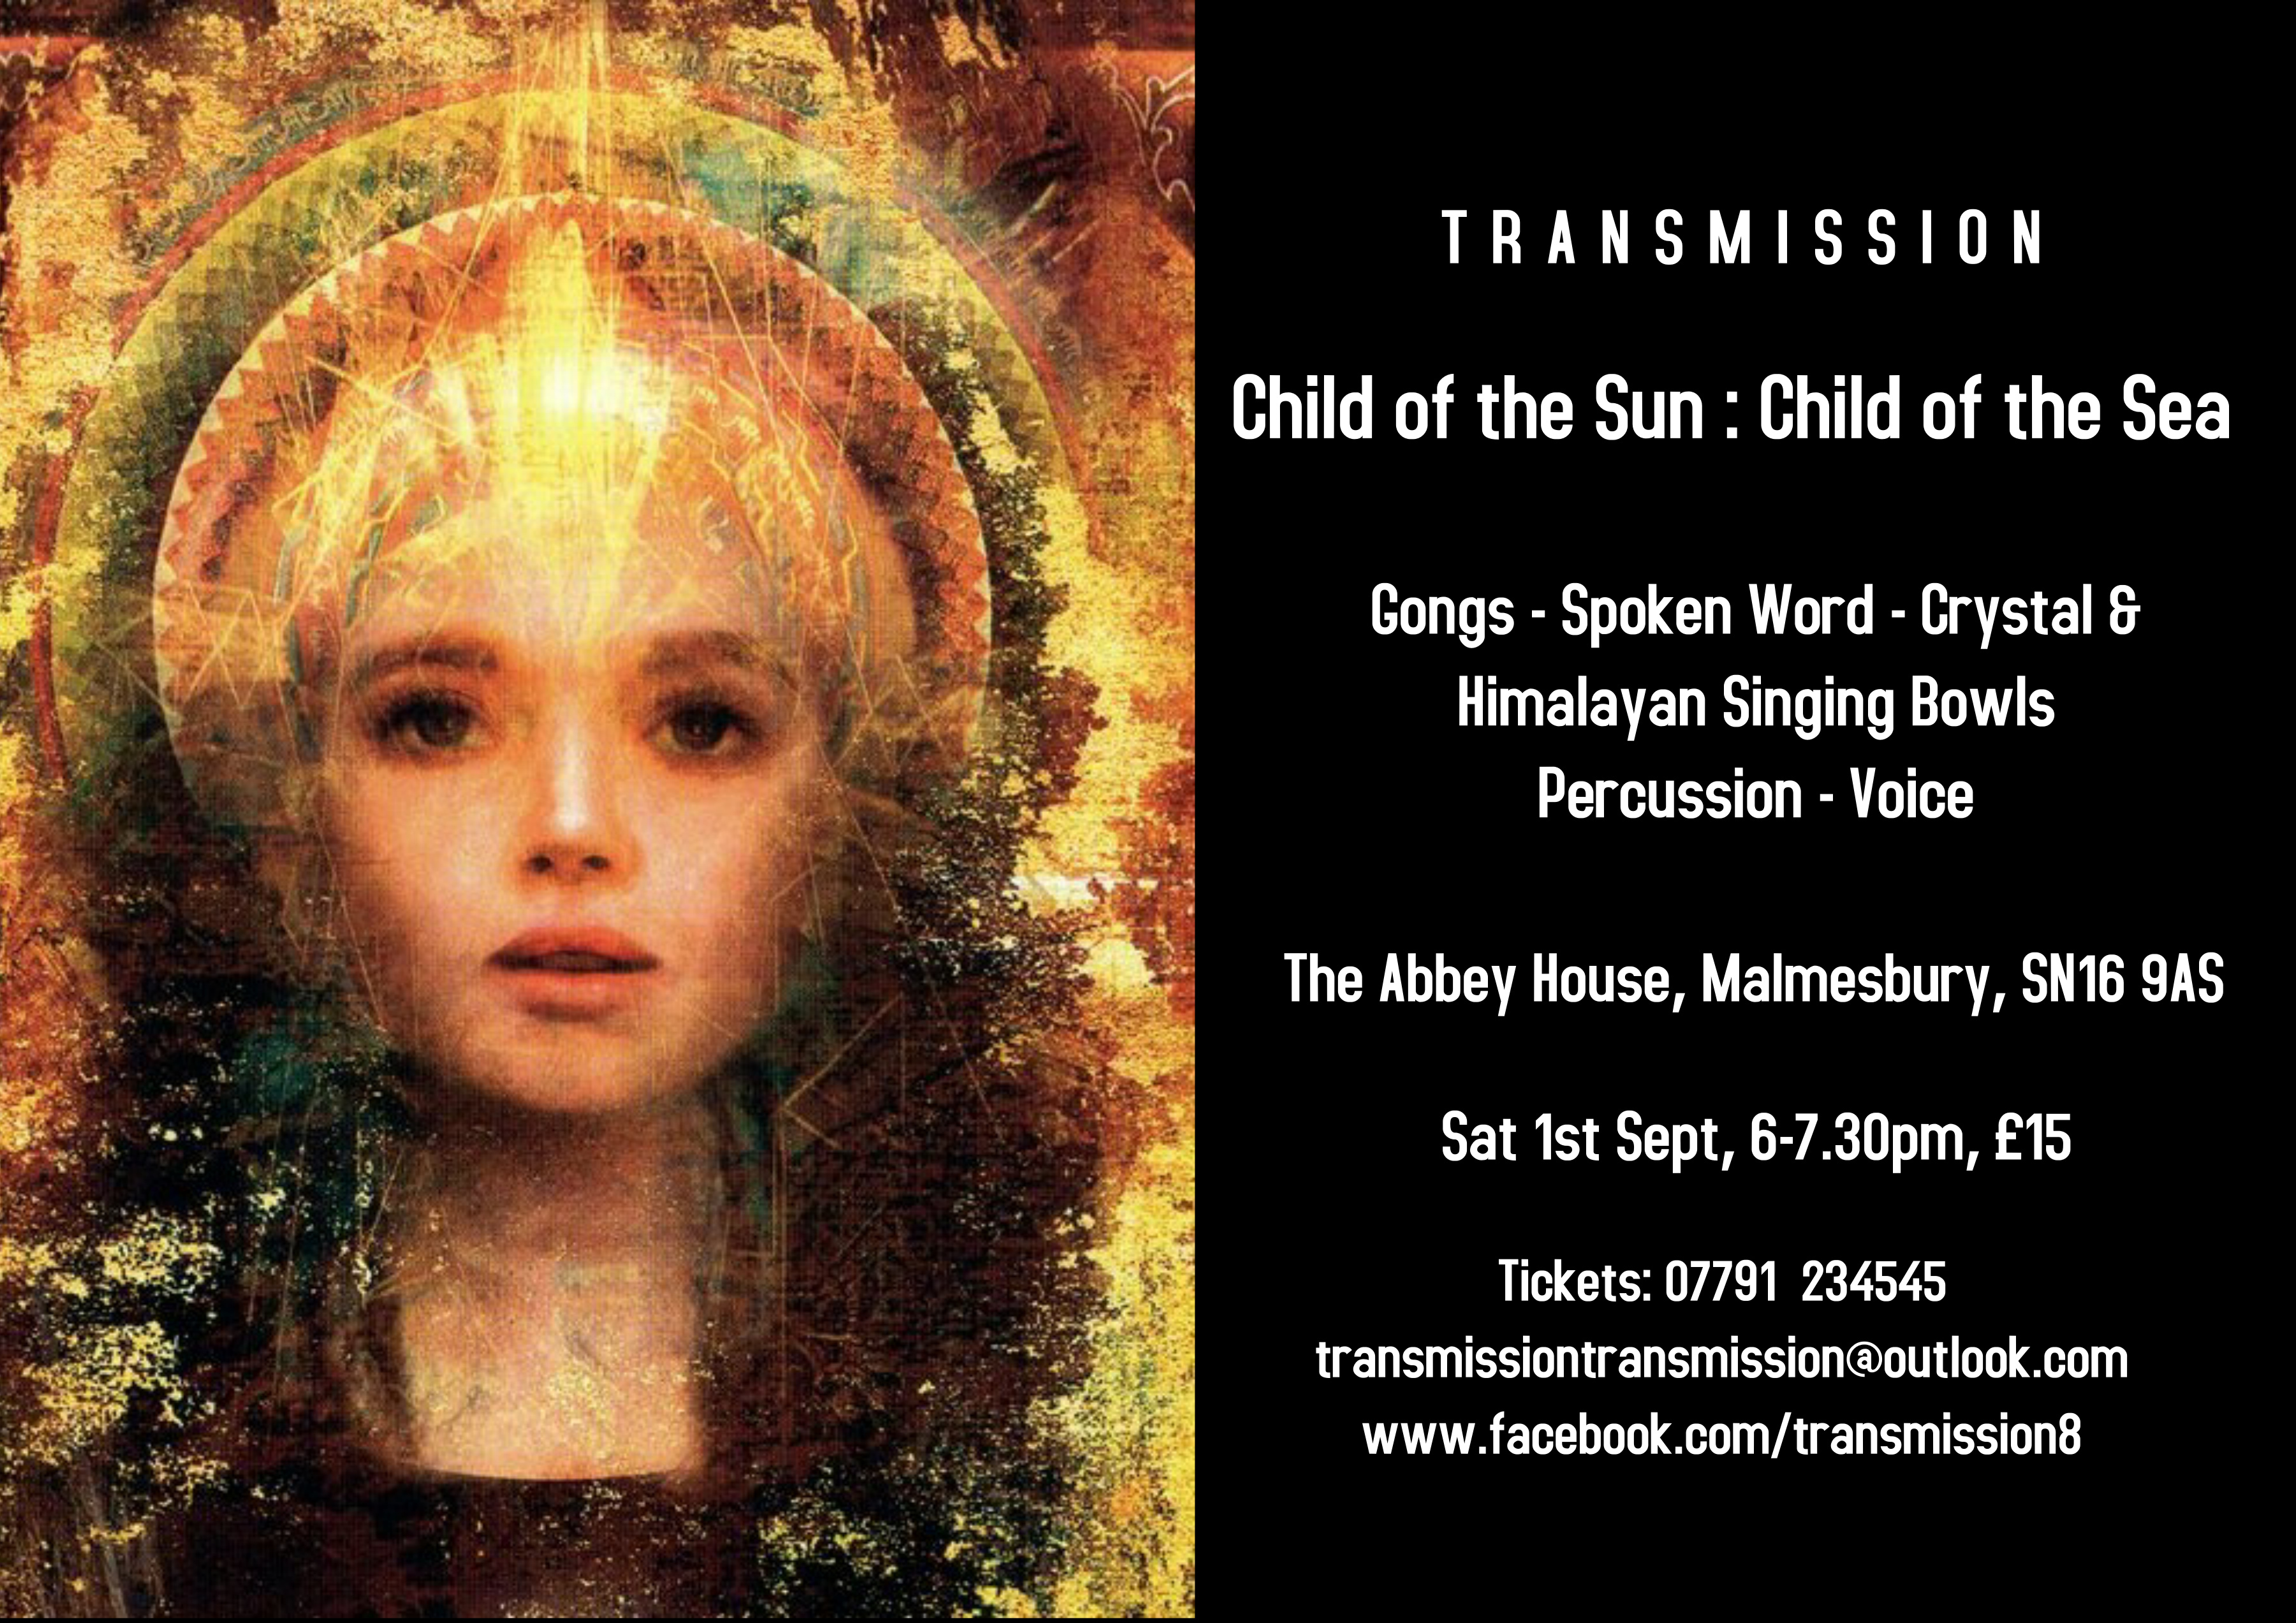 WILTSHIRE - Child of the Sun : Child of the Sea. An Evening of Sound. 